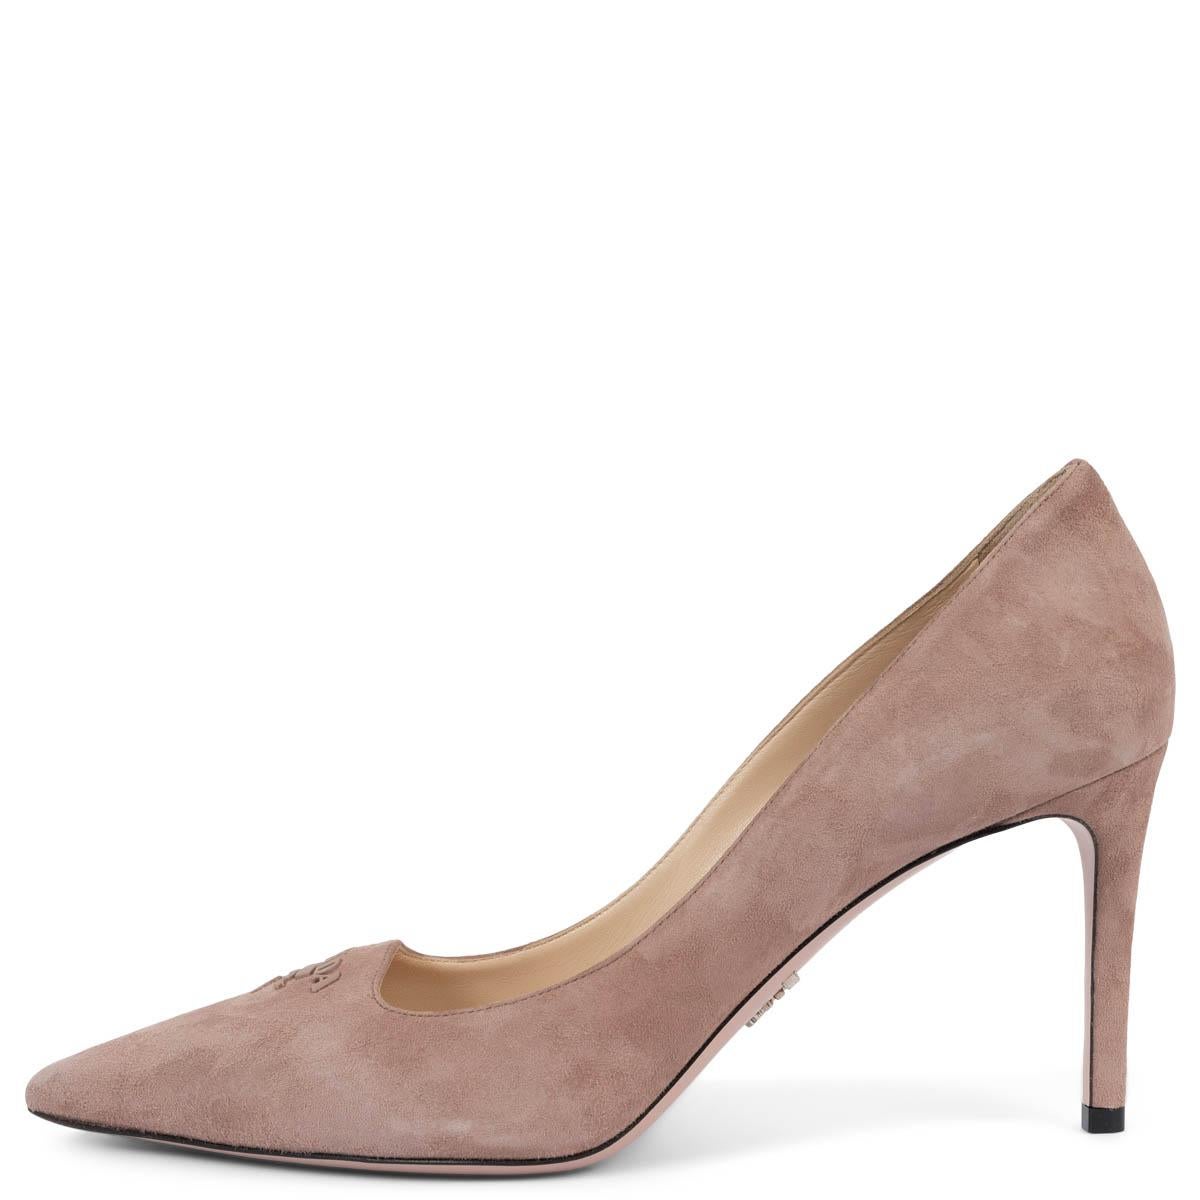 PRADA dusty rose suede LOGO POINTED TOE Pumps Shoes 39.5 In New Condition For Sale In Zürich, CH